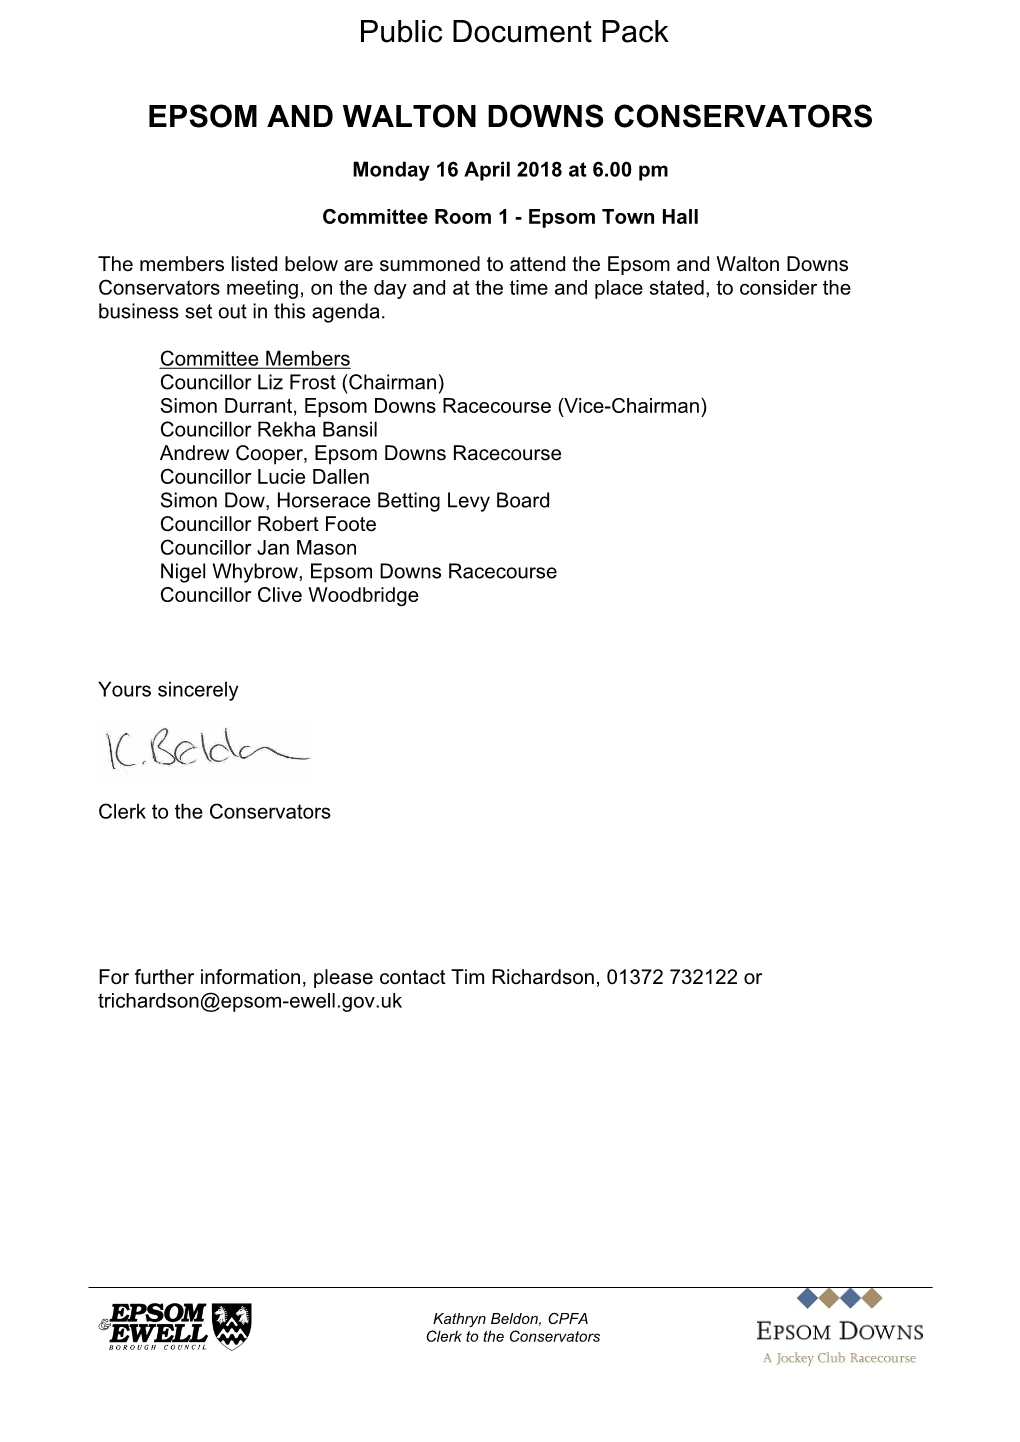 (Public Pack)Agenda Document for Epsom and Walton Downs